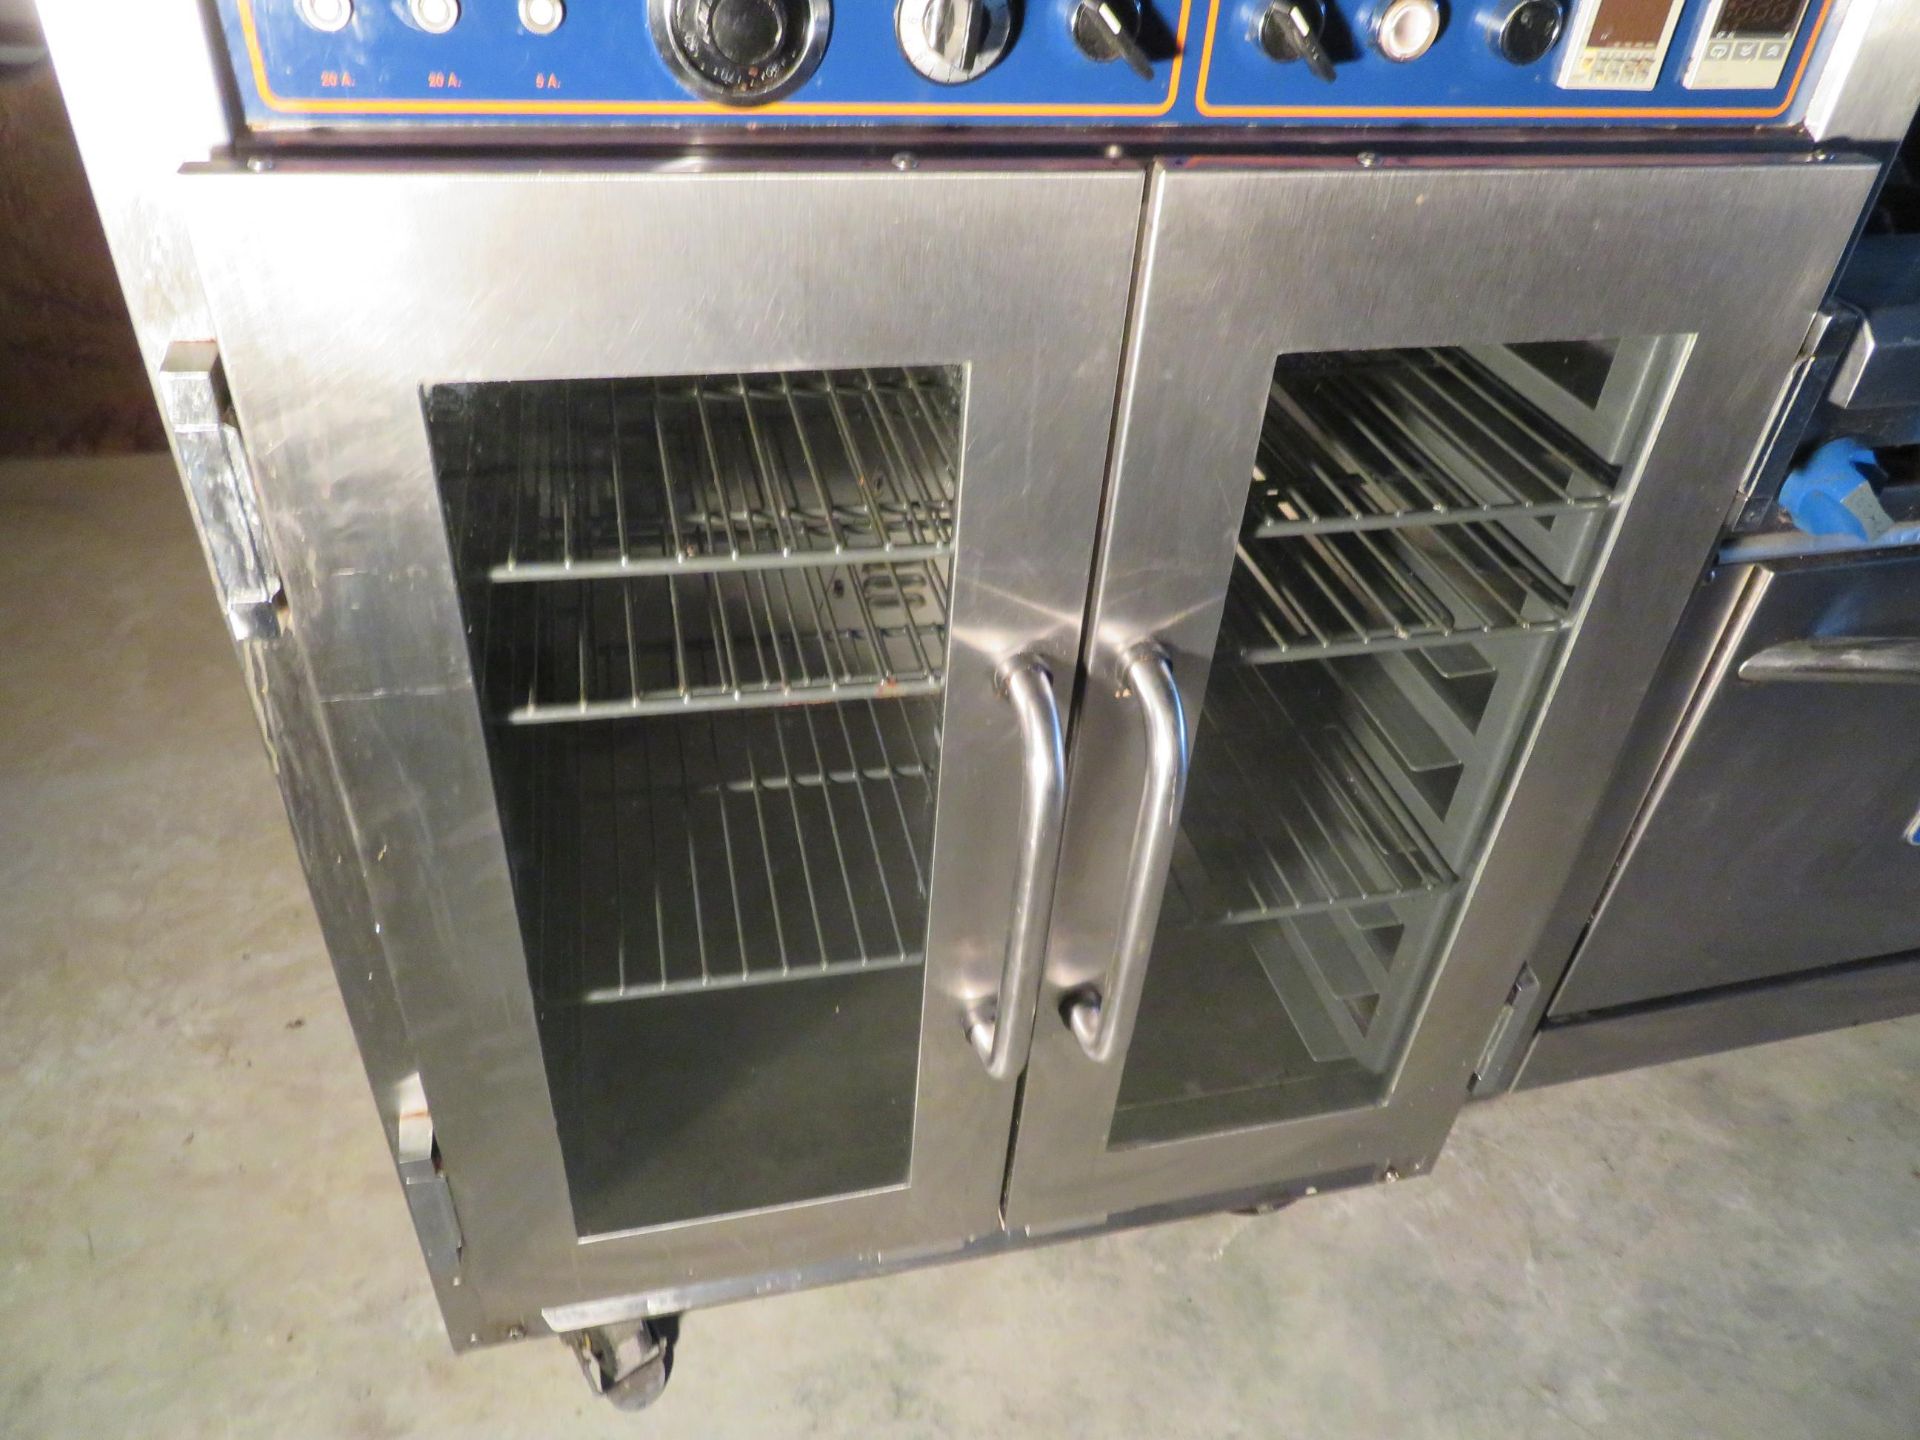 DOYON oven and proofer on wheels, Mod # JET AIR, approx. 32"w x 33"d x 71"h - Image 3 of 4